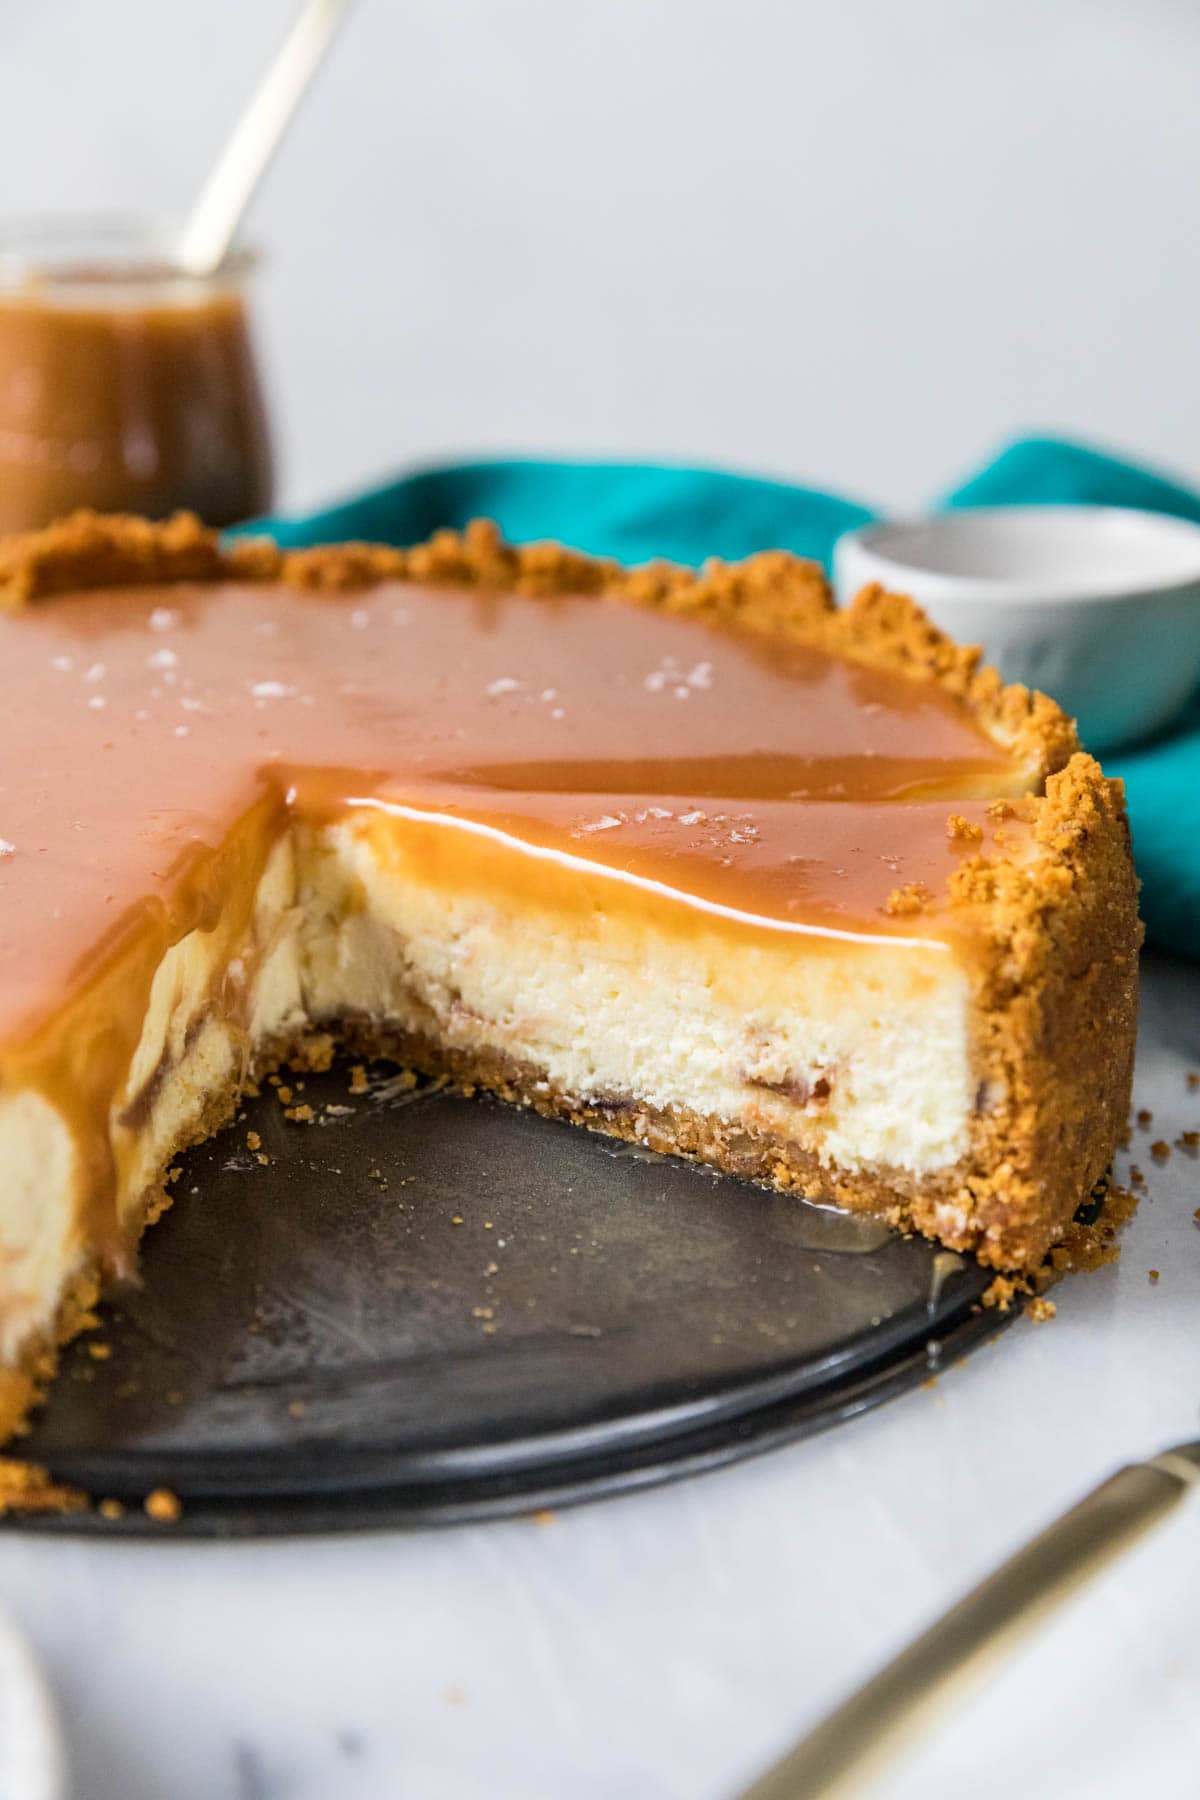 Caramel topped salted caramel cheesecake that's missing several slices.